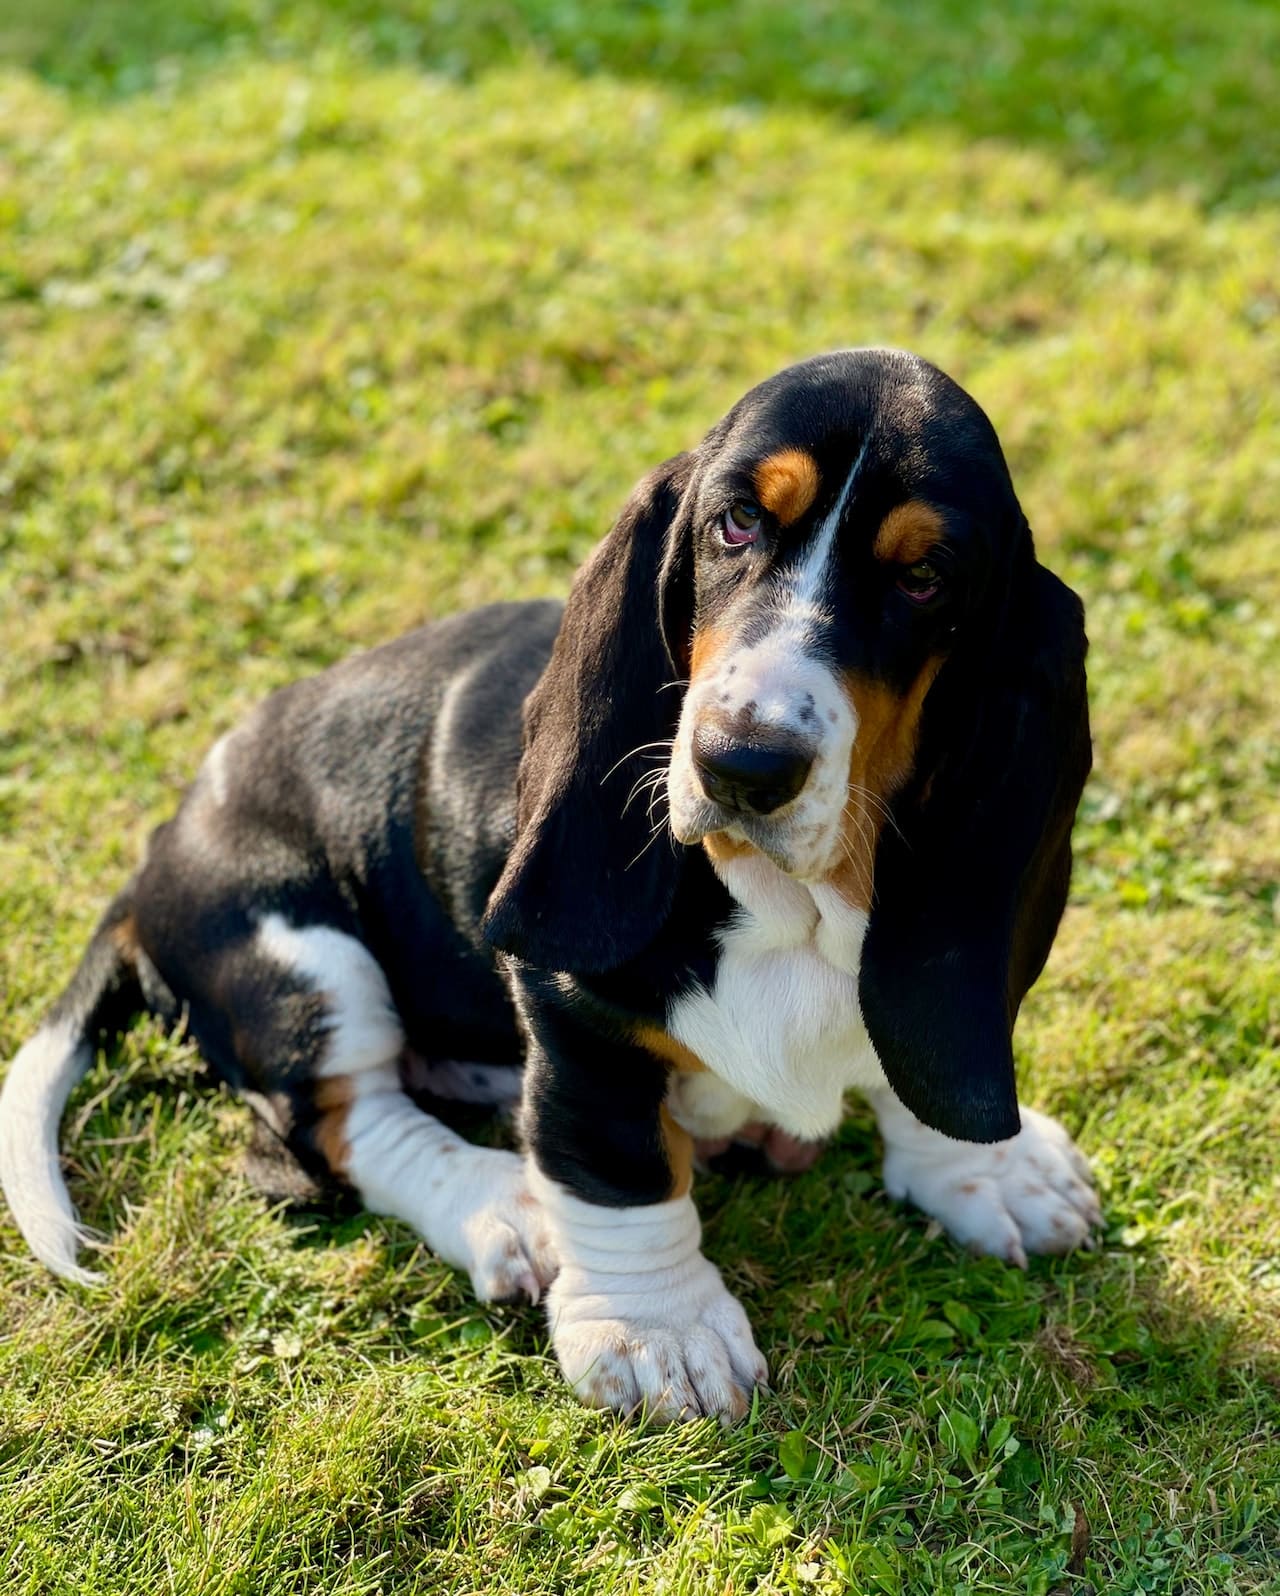 This loyal Basset Hound is an exceptional scenthound.